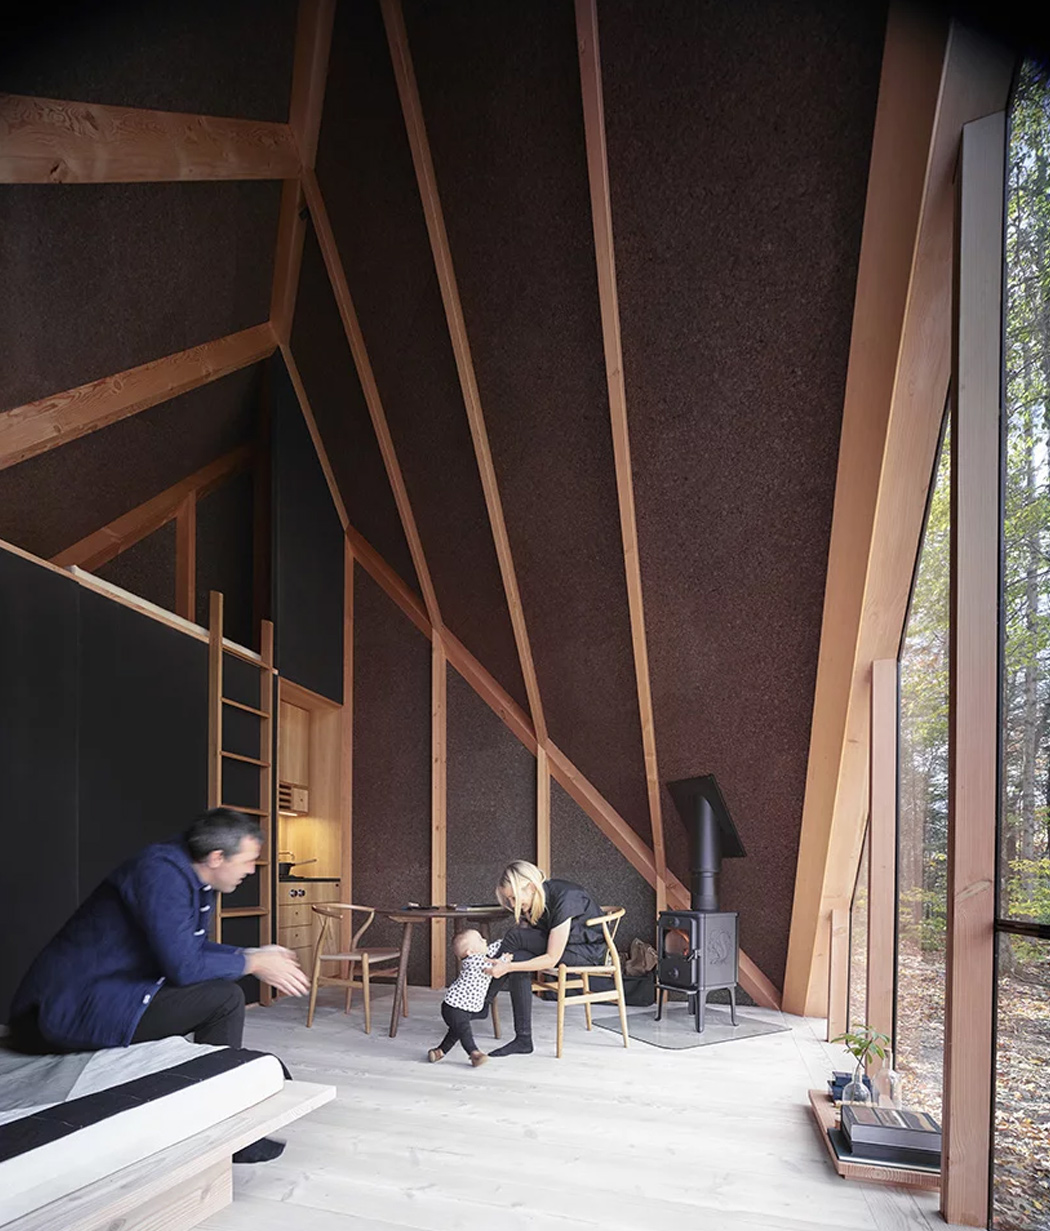 https://www.yankodesign.com/images/design_news/2020/07/tiny-home-setups-that-prove-why-micro-living-will-be-the-next-big-trend-part-4/10-A45-Bjarke-Ingels-Group_Tiny-Home2.jpg